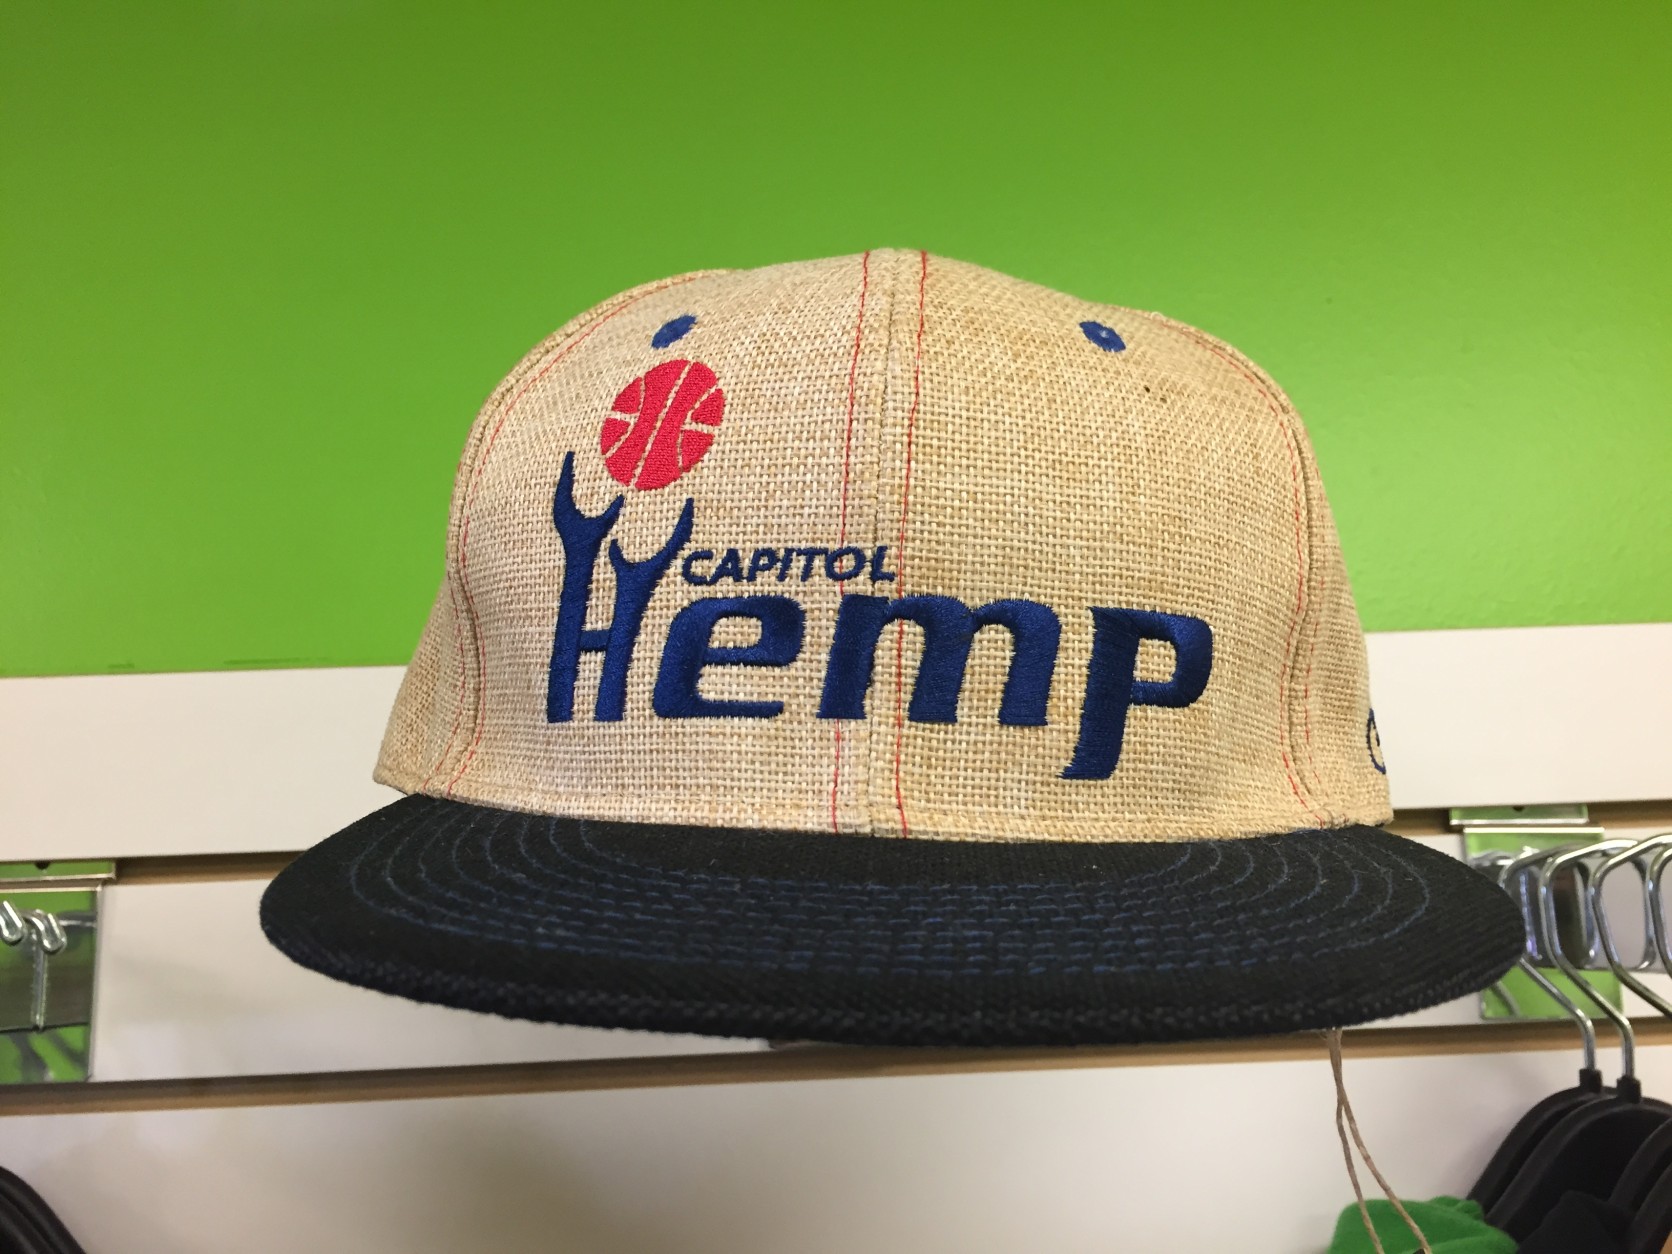 Capitol Hemp sells far more than smoking devices. It offers hemp clothes, food products and art. (WTOP/Andrew Mollenbeck)